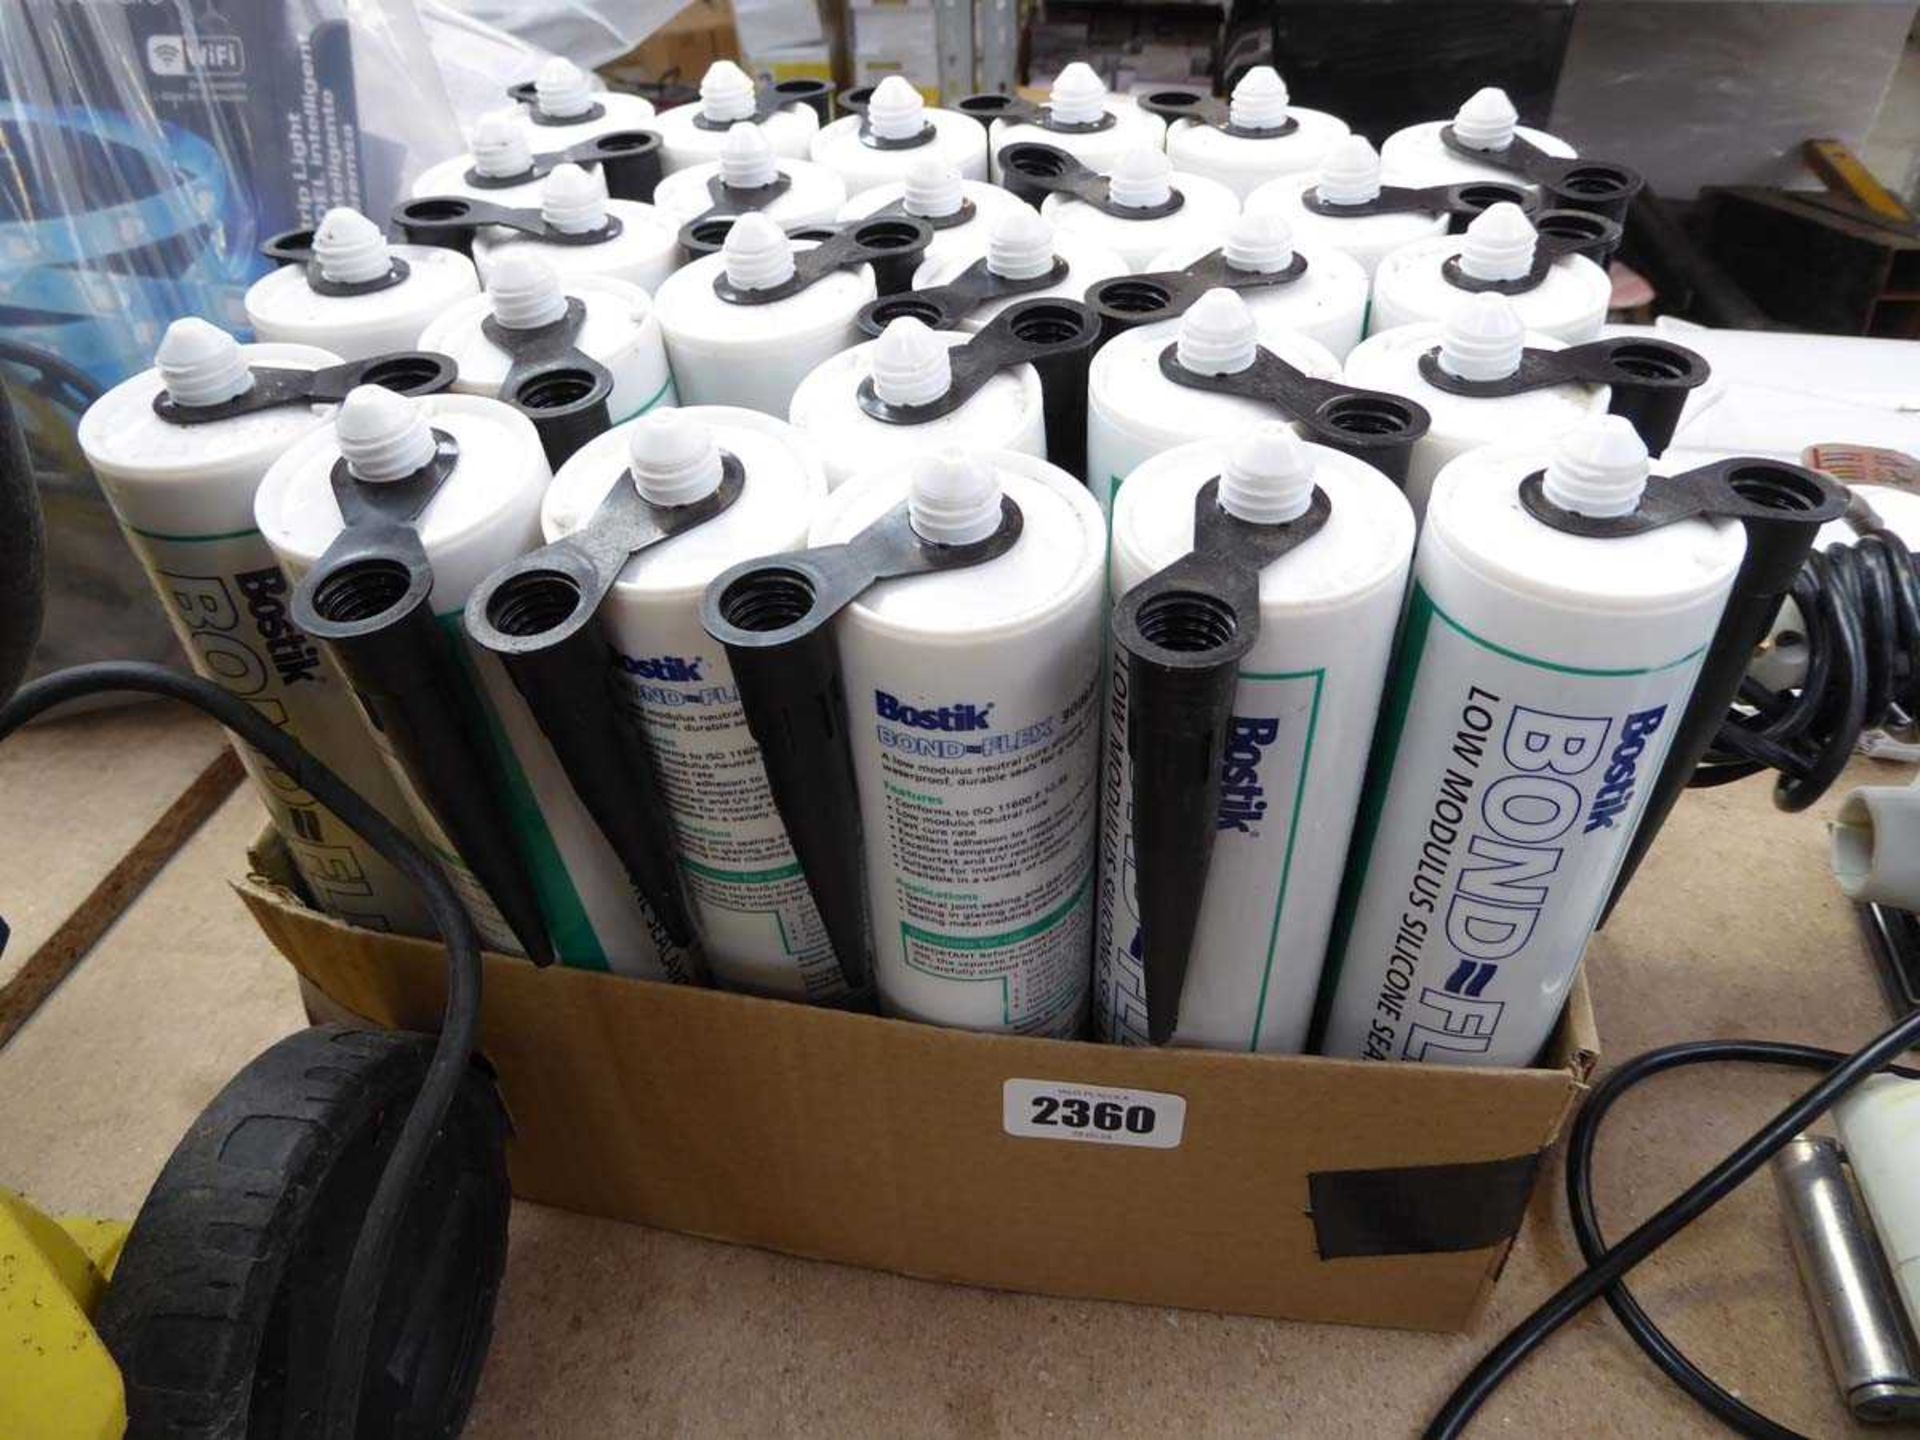 Crate containing approx. 27 tubes of Bostik Bond-Flex silicone sealant